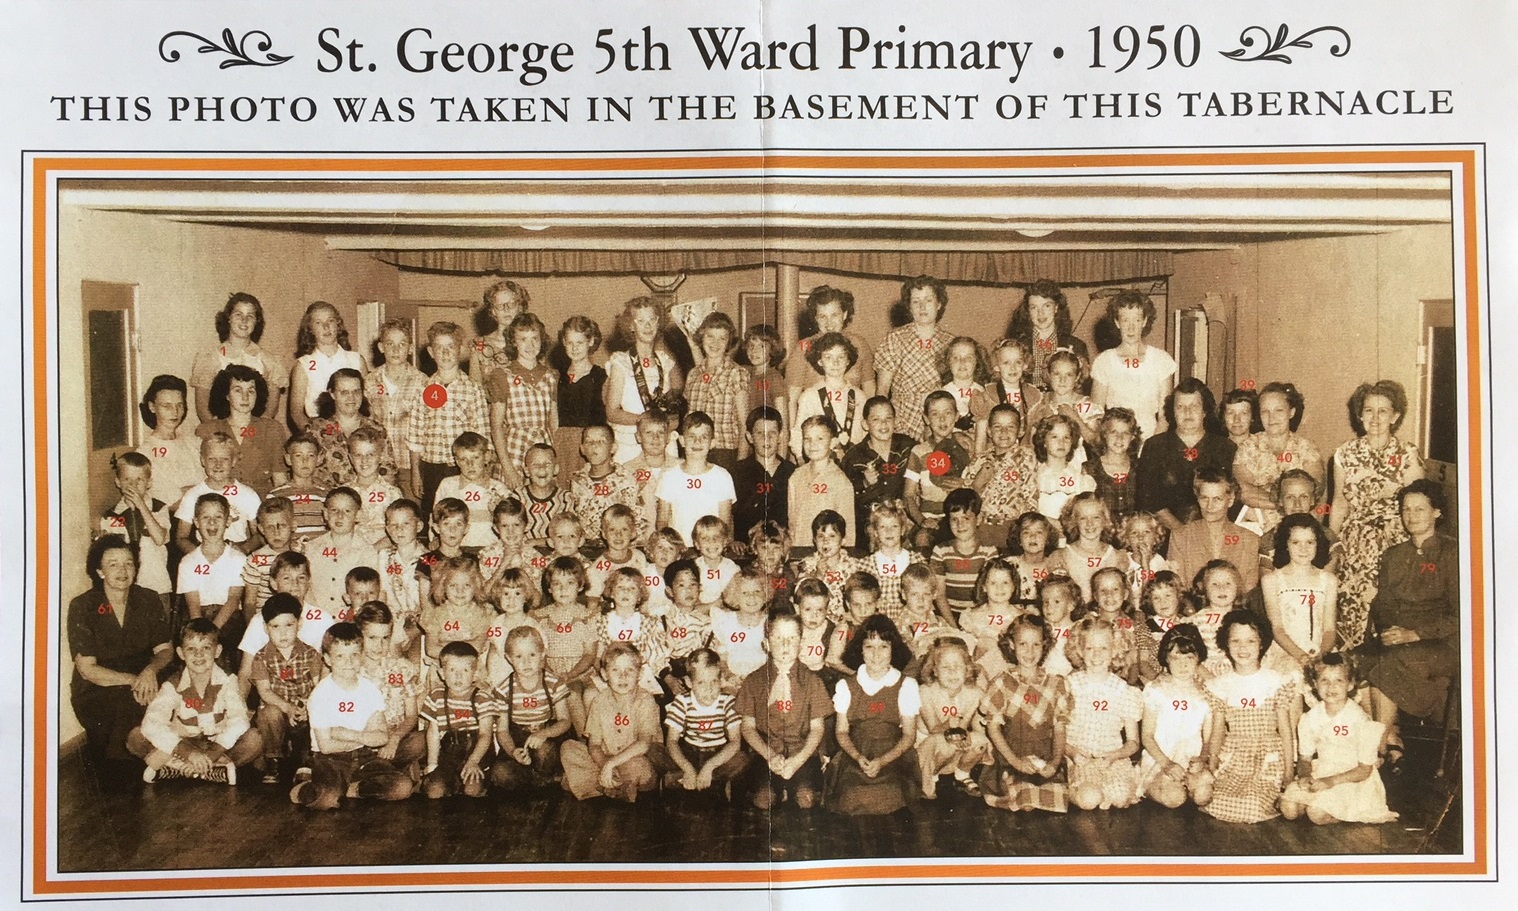 Photo of the St. George 5th Ward Primary with the people numbered